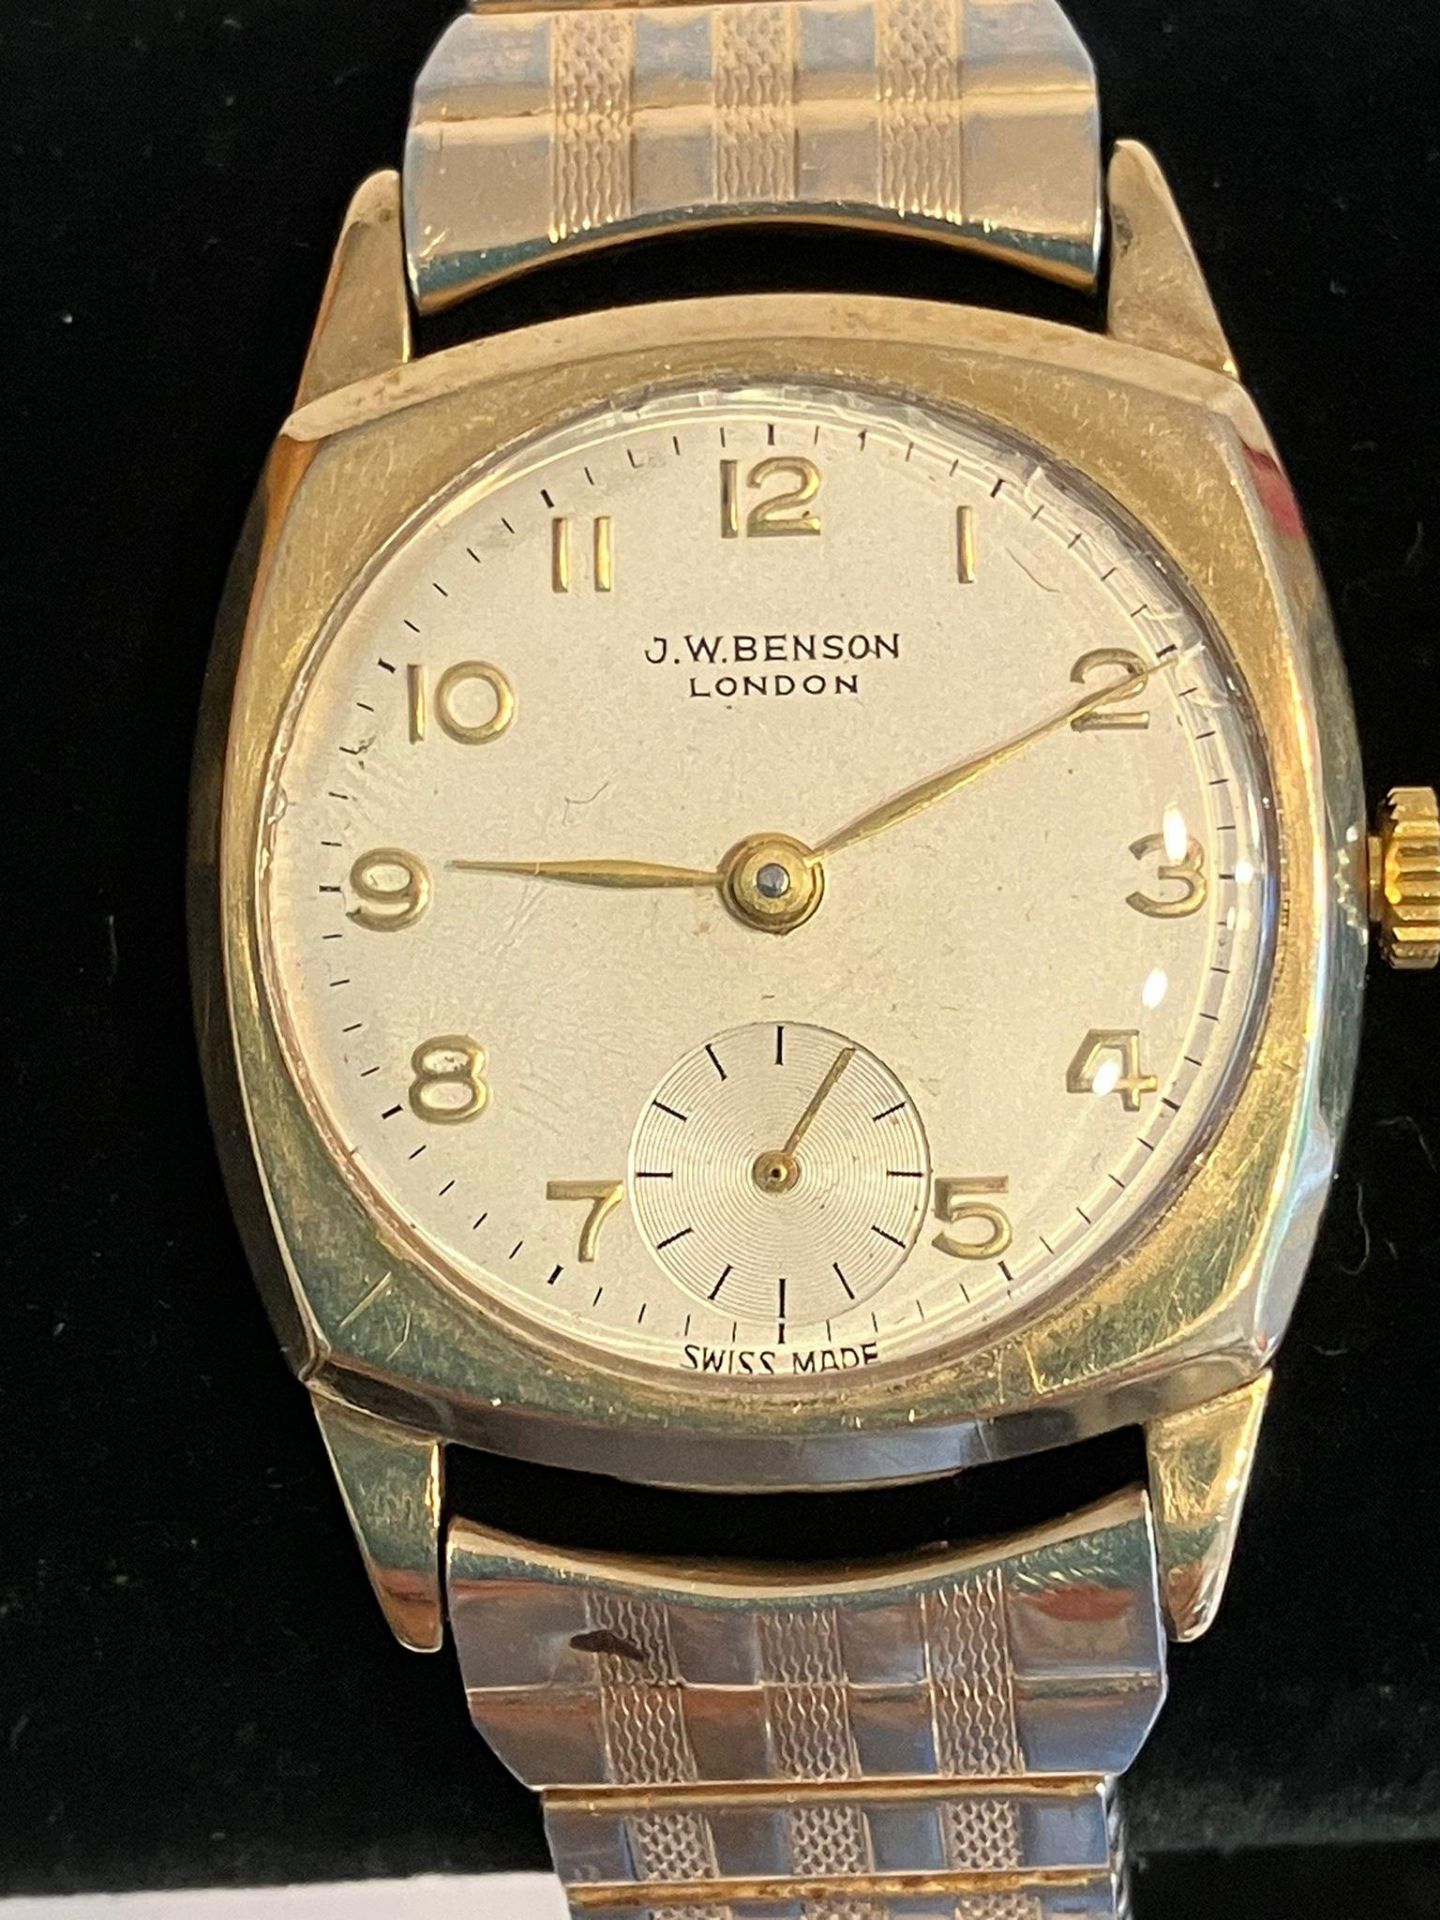 Gentlemans Vintage 9 carat GOLD BENSON WRISTWATCH. Manual winding with exceptional movement.